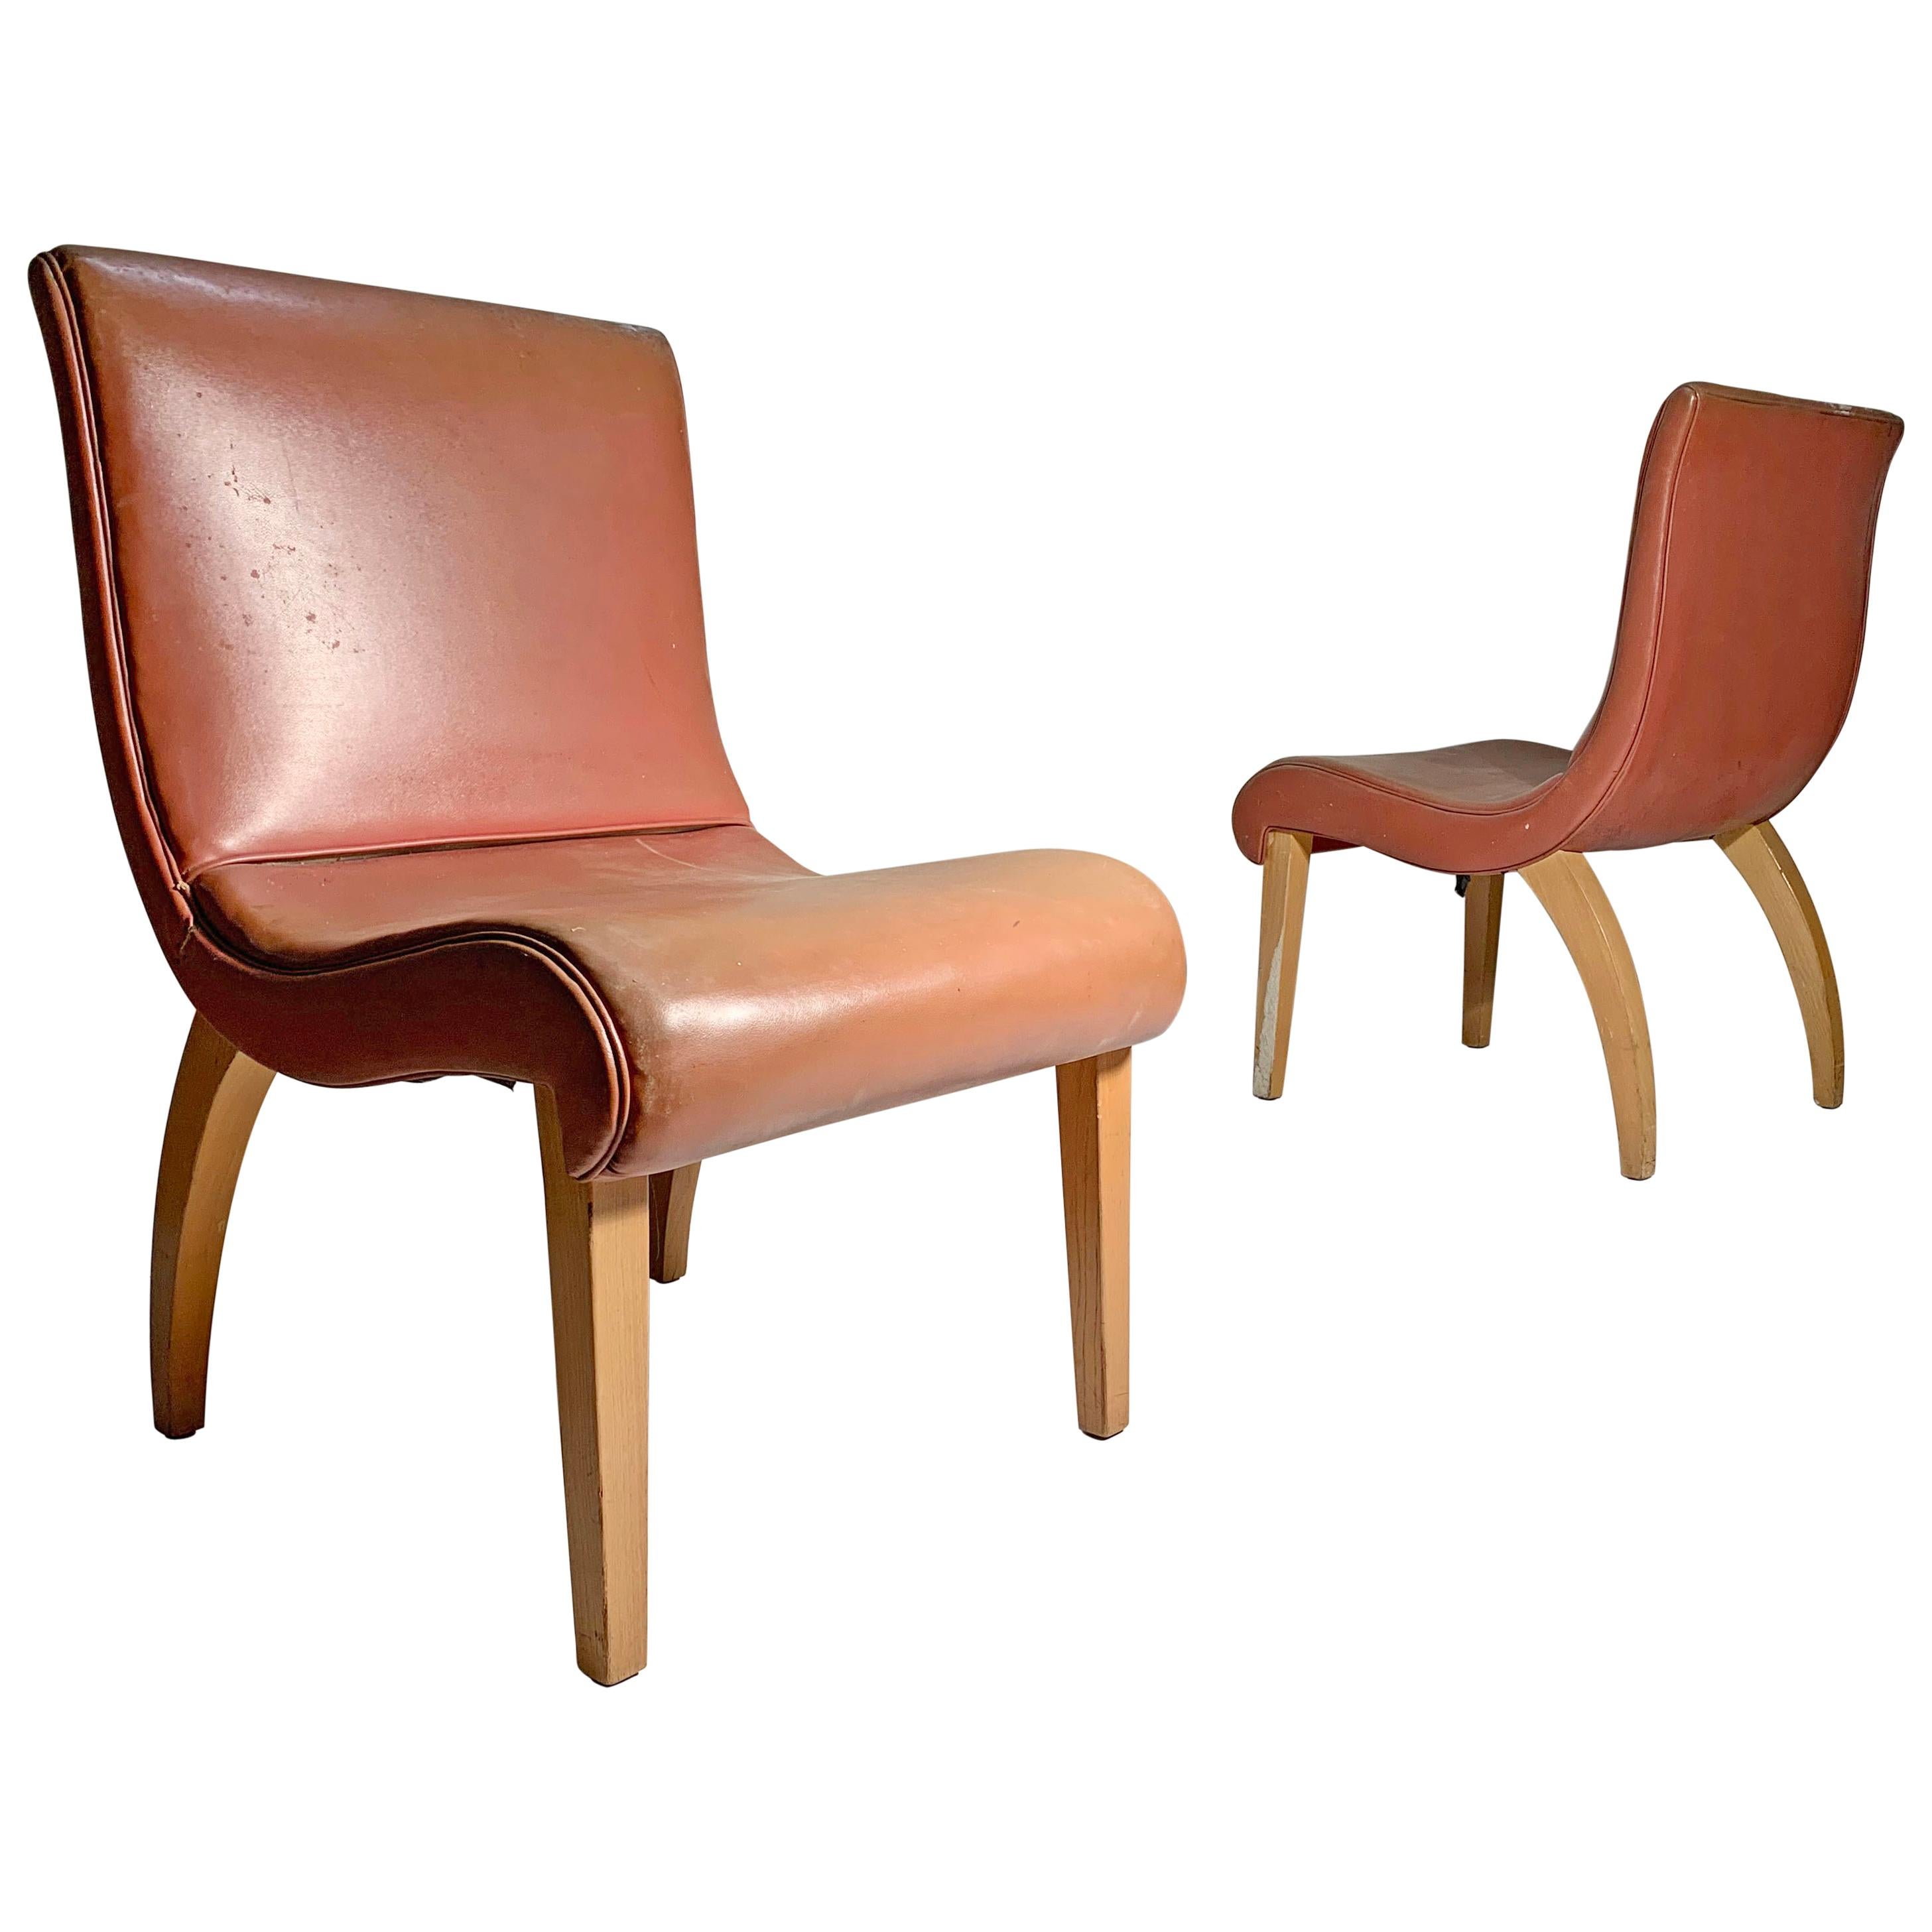 Pair of 1940s Lounge or Side Chairs Attributed to Gilbert Rohde